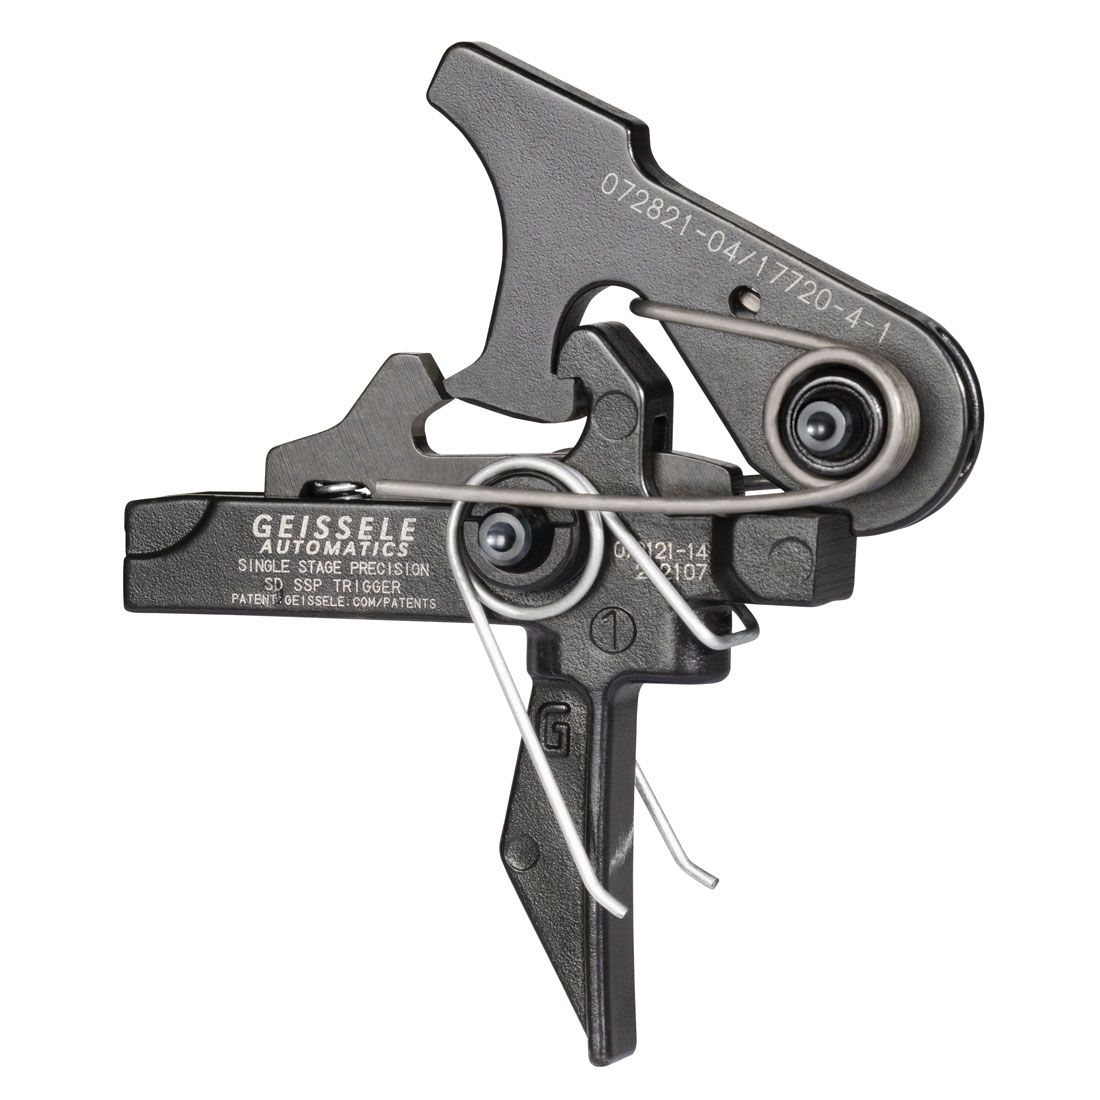 Geissele Single stage precision flat bow trigger|05-483